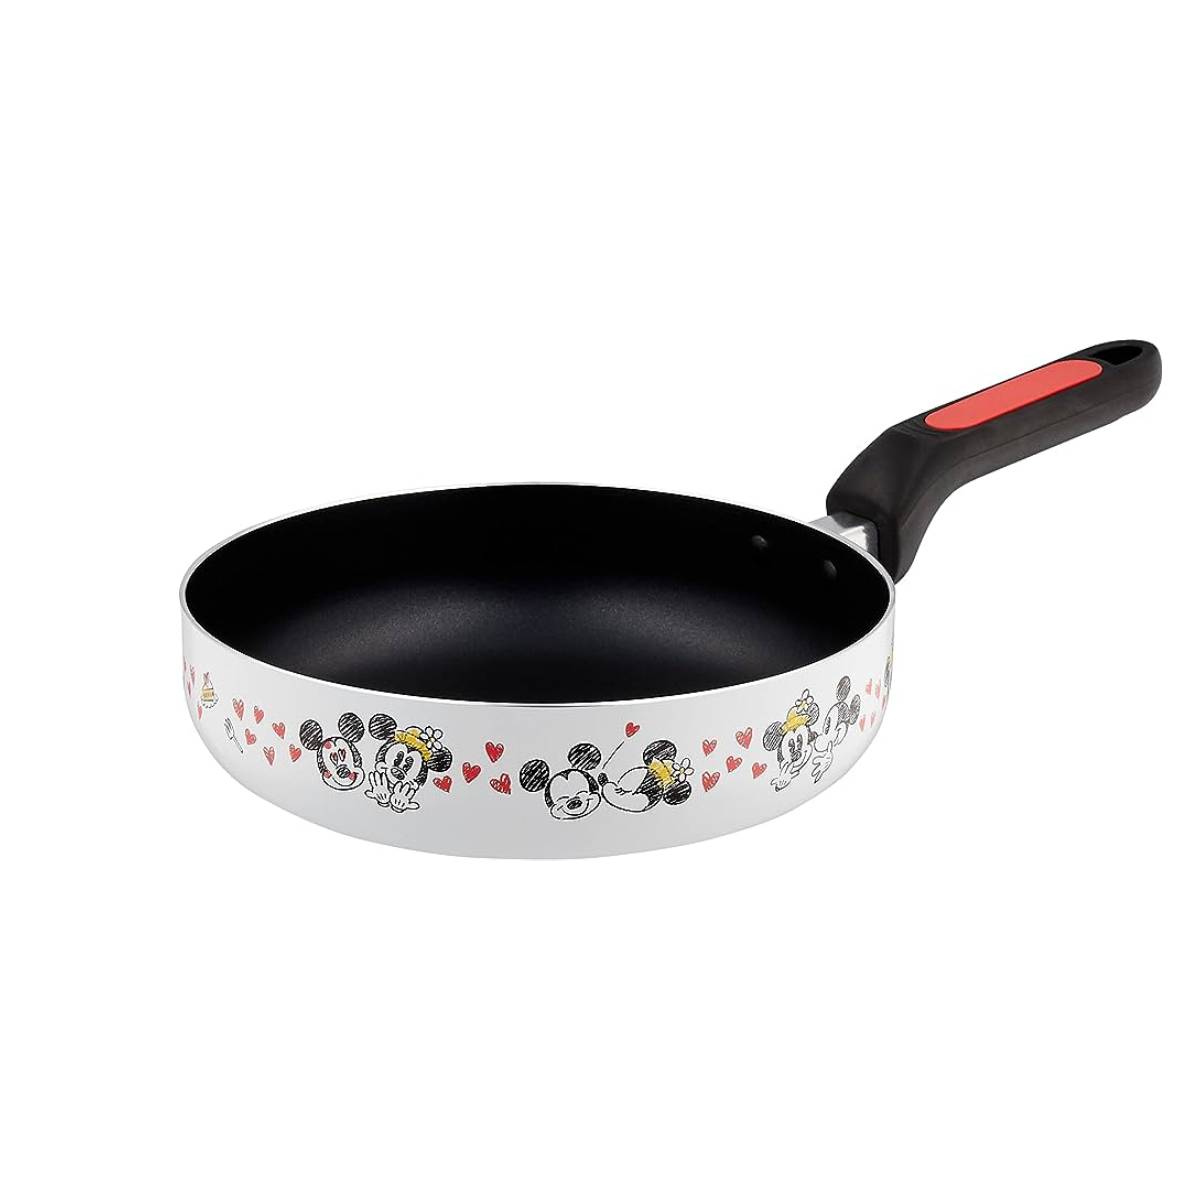 Pan Pot Set - Mickey & Minnie Mouse 4in1